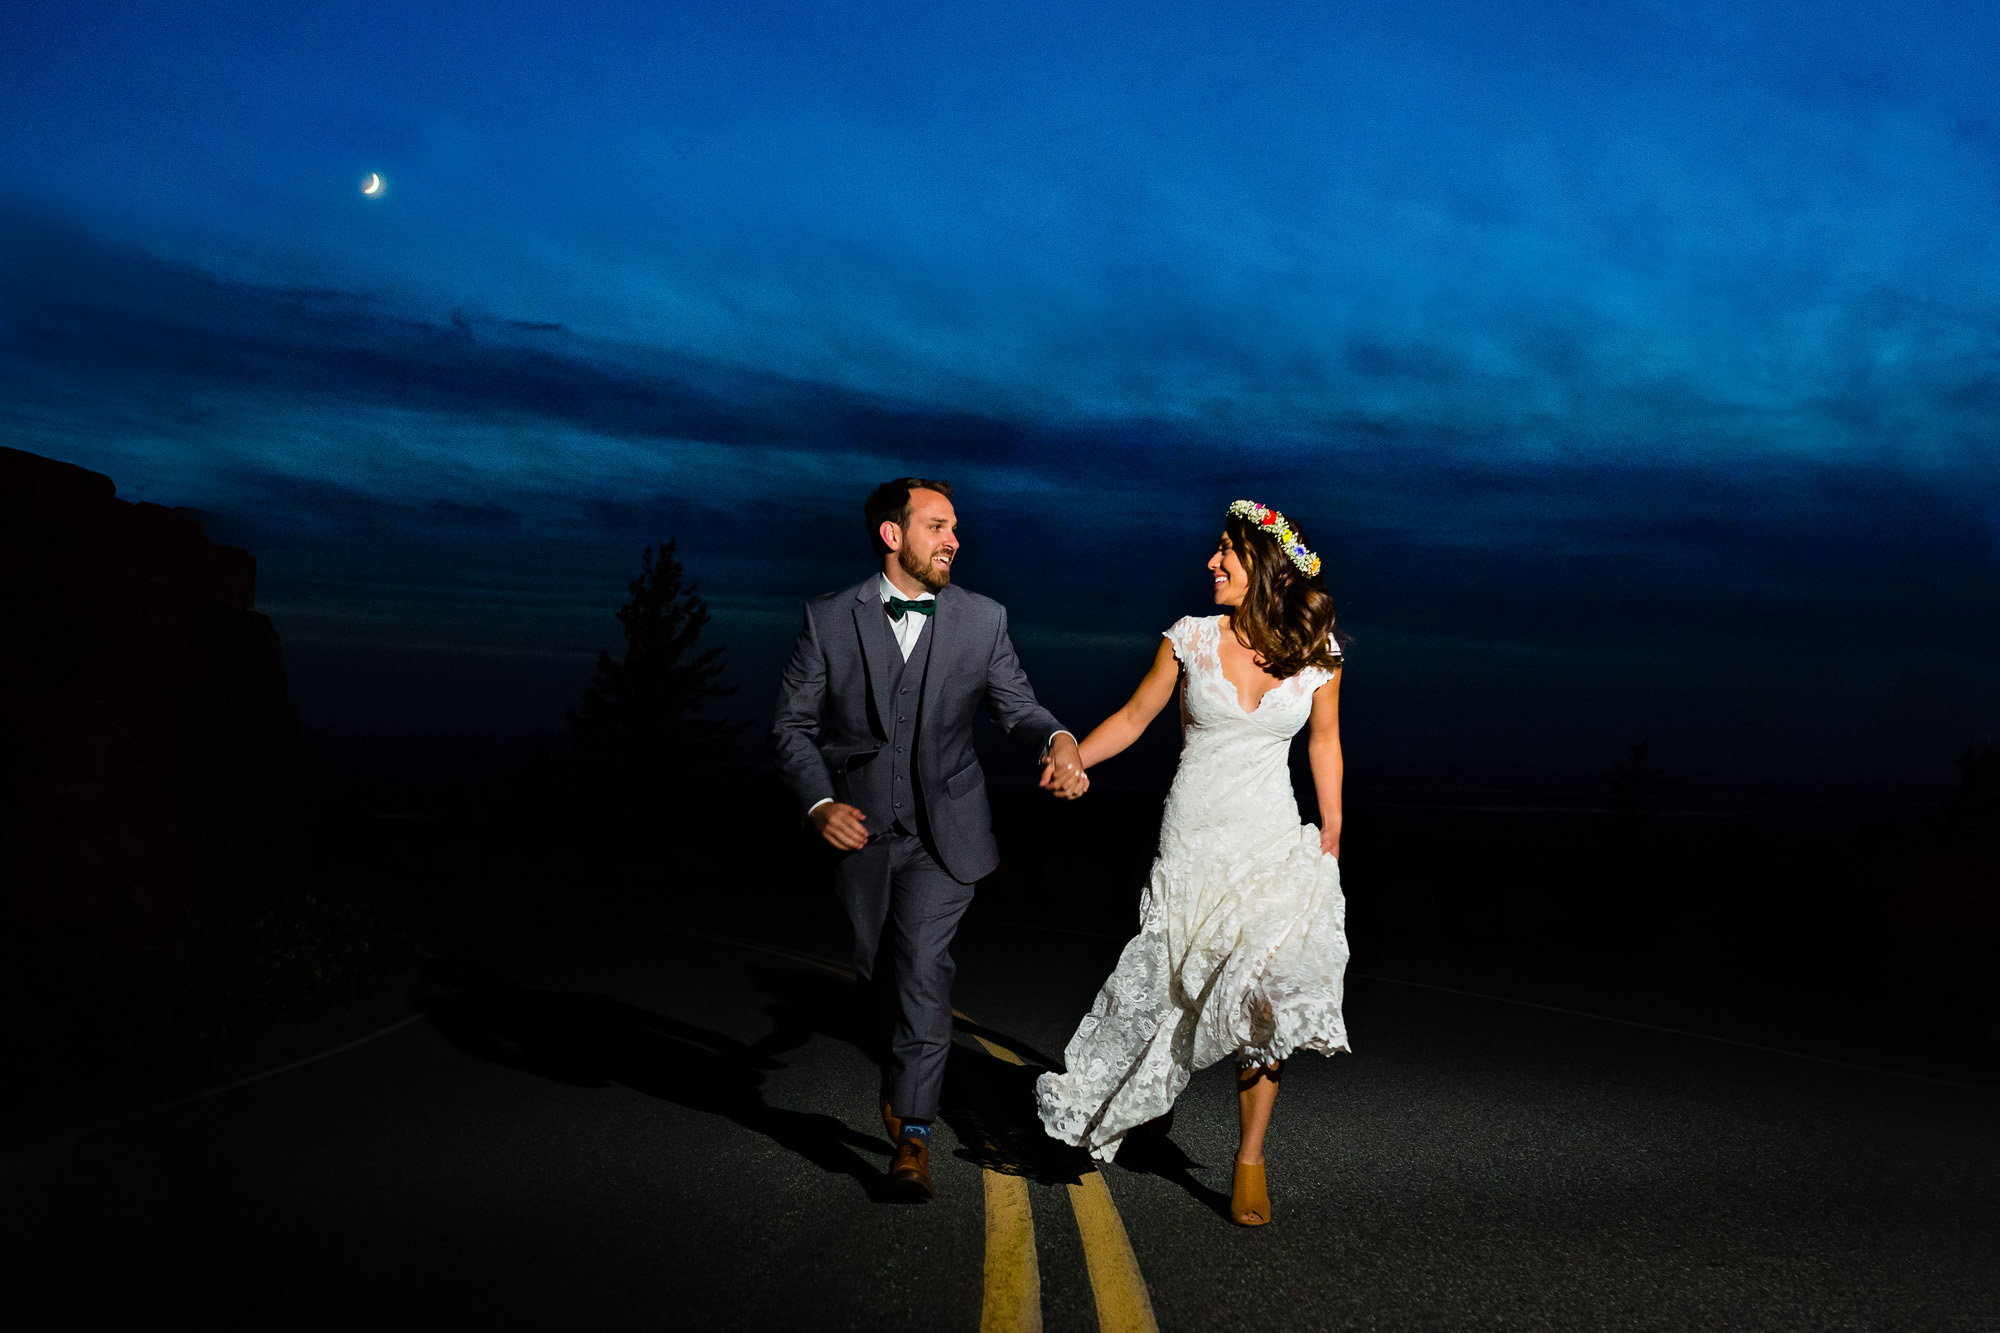 A bride and groom elope at twilight under the moon in Acadia National Park on Cadillac Mountain